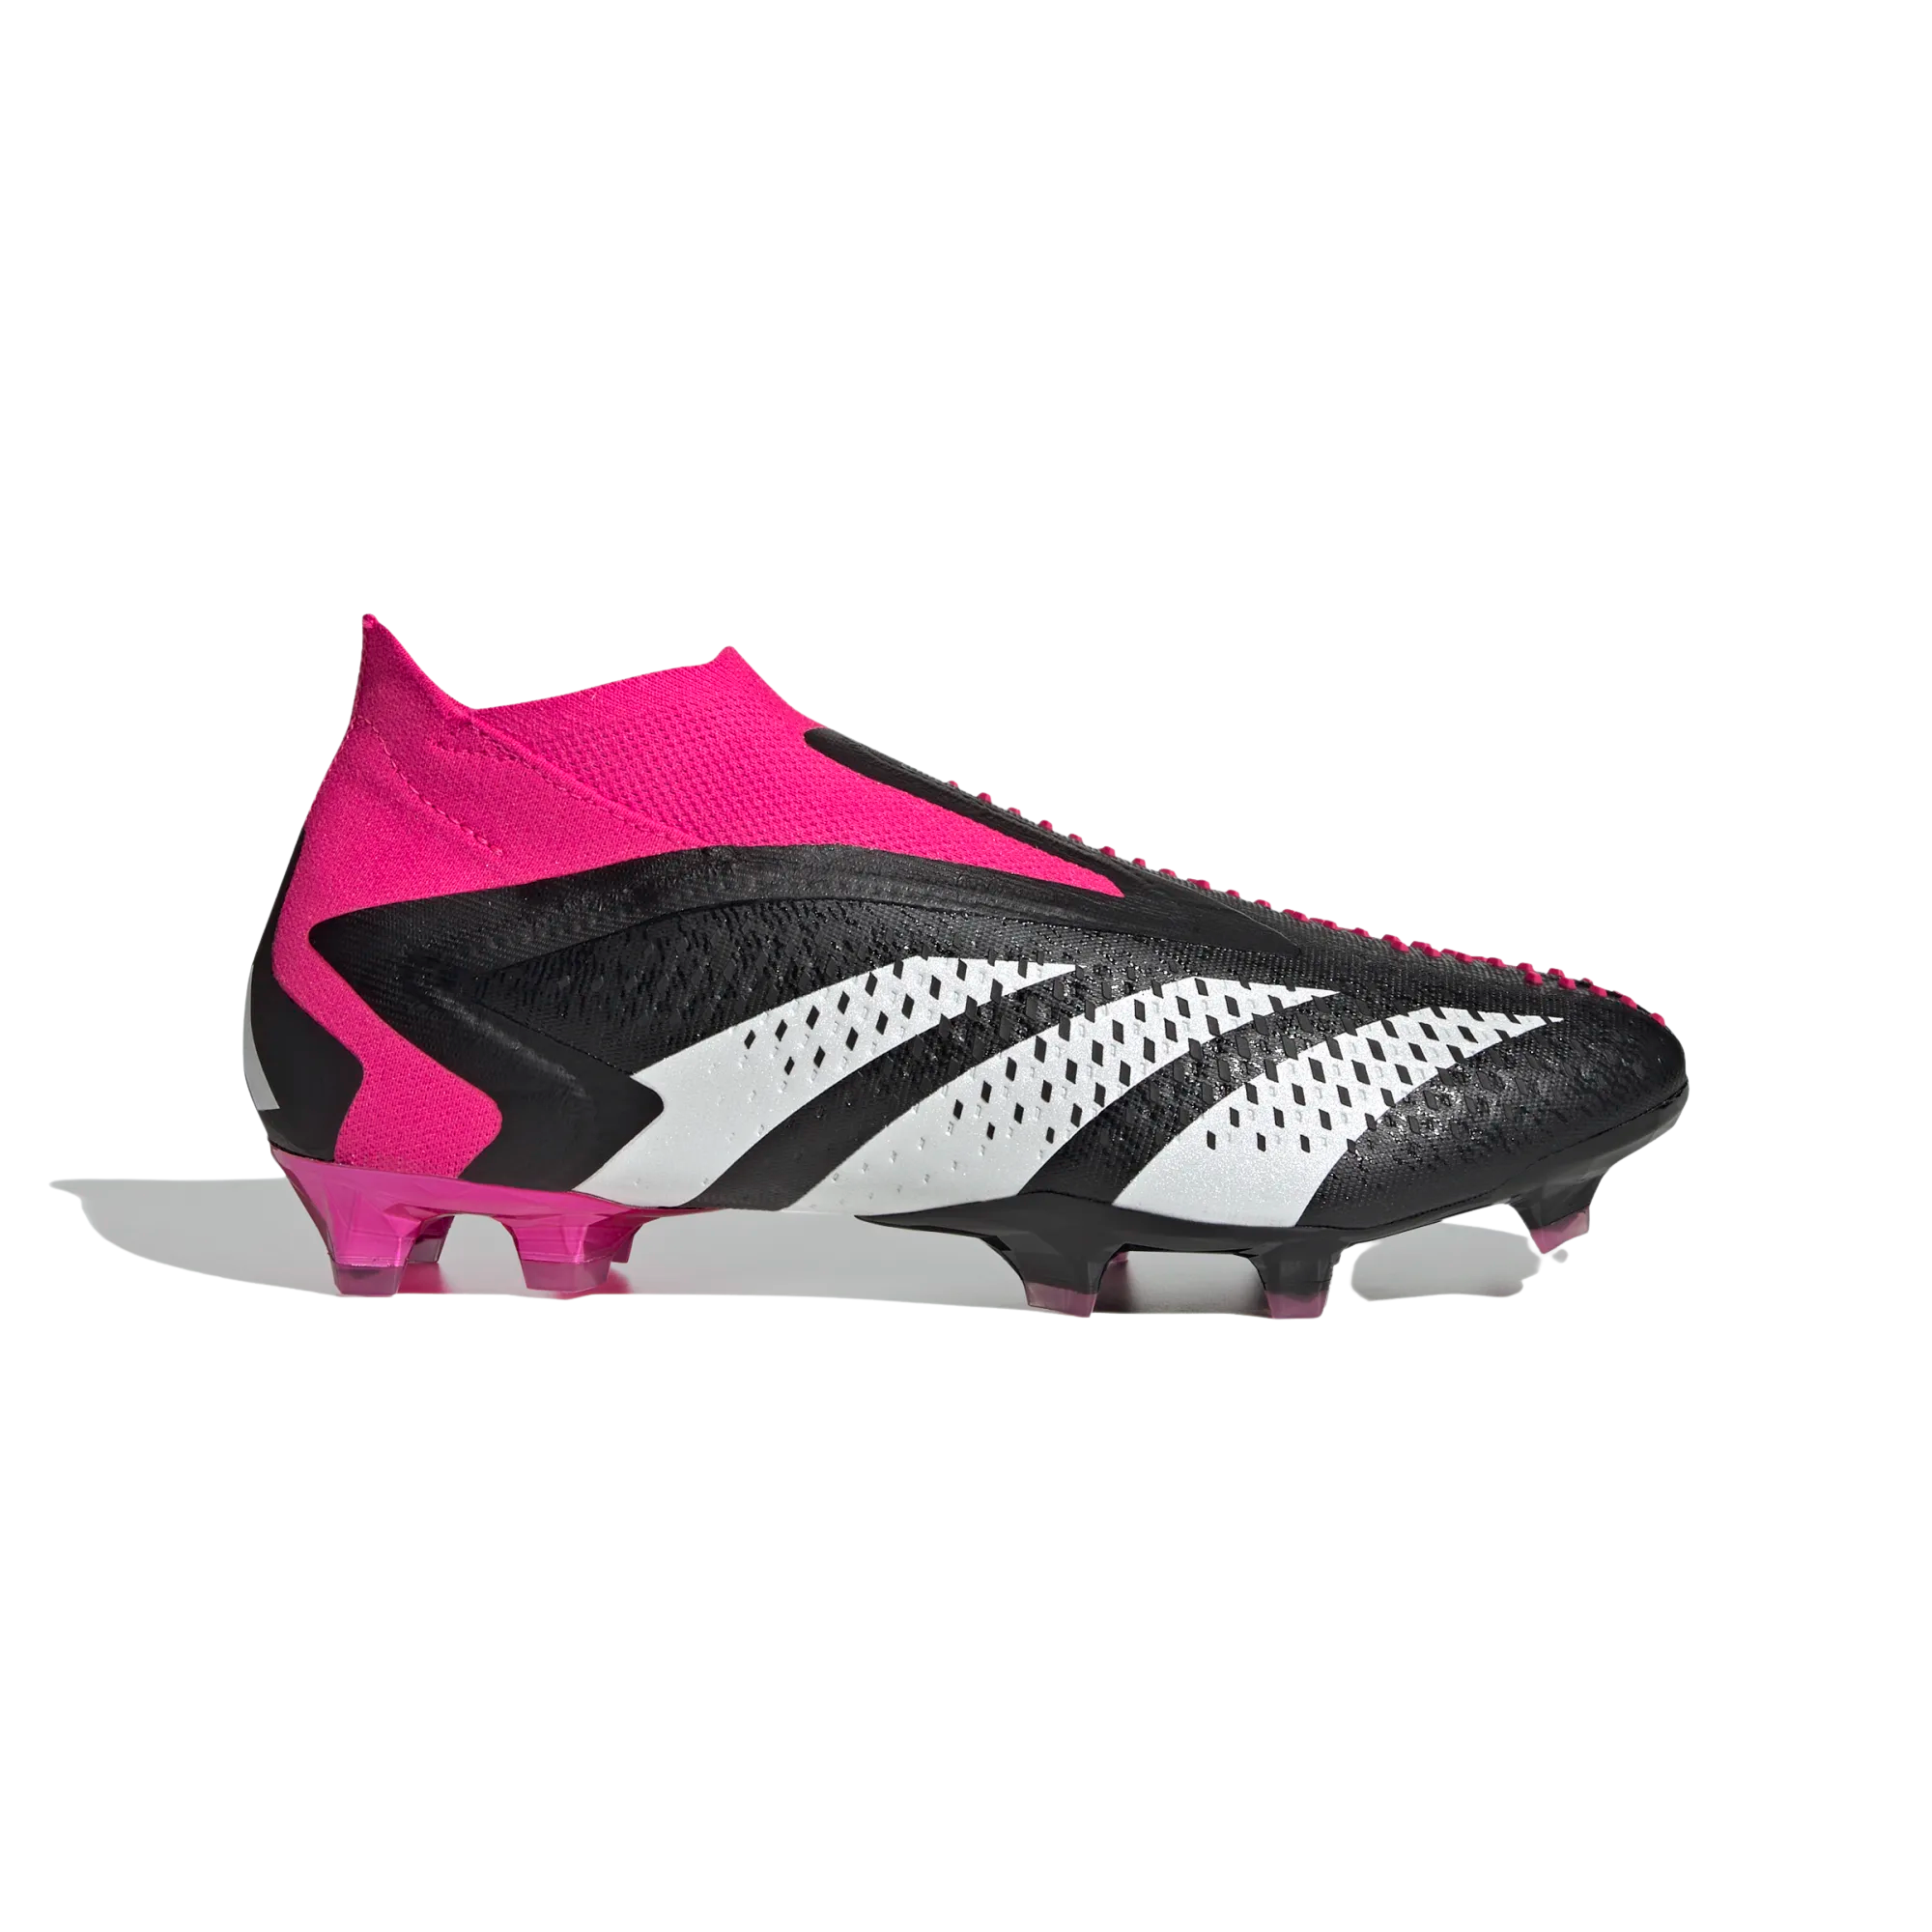 ADIDAS PREDATOR ACCURACY+ FIRM GROUND SOCCER CLEATS-Core Black / Cloud White / Team Shock Pink 2